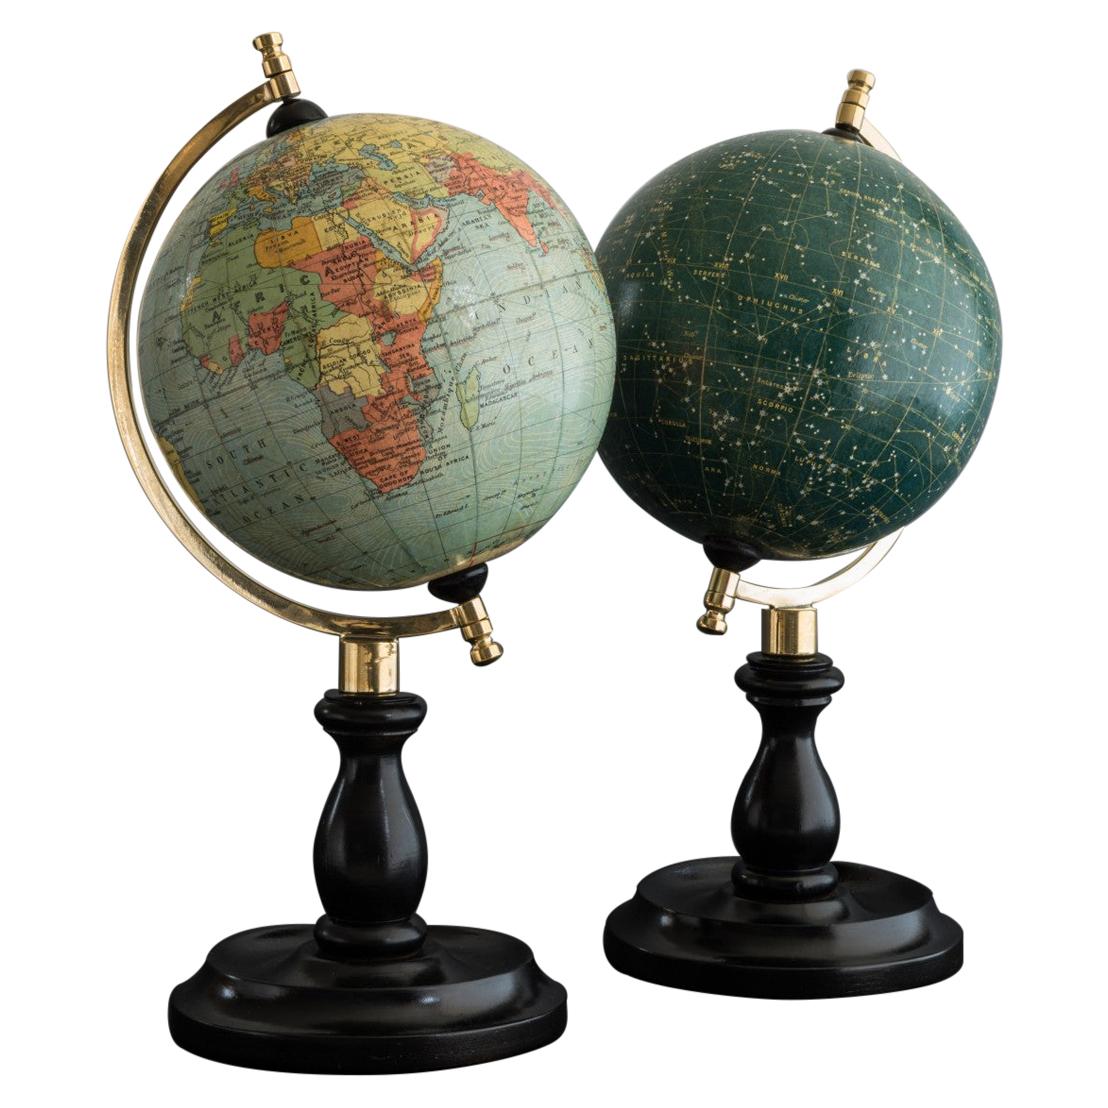 Set of Matching Terrestrial and Celestial Globes, circa 1935